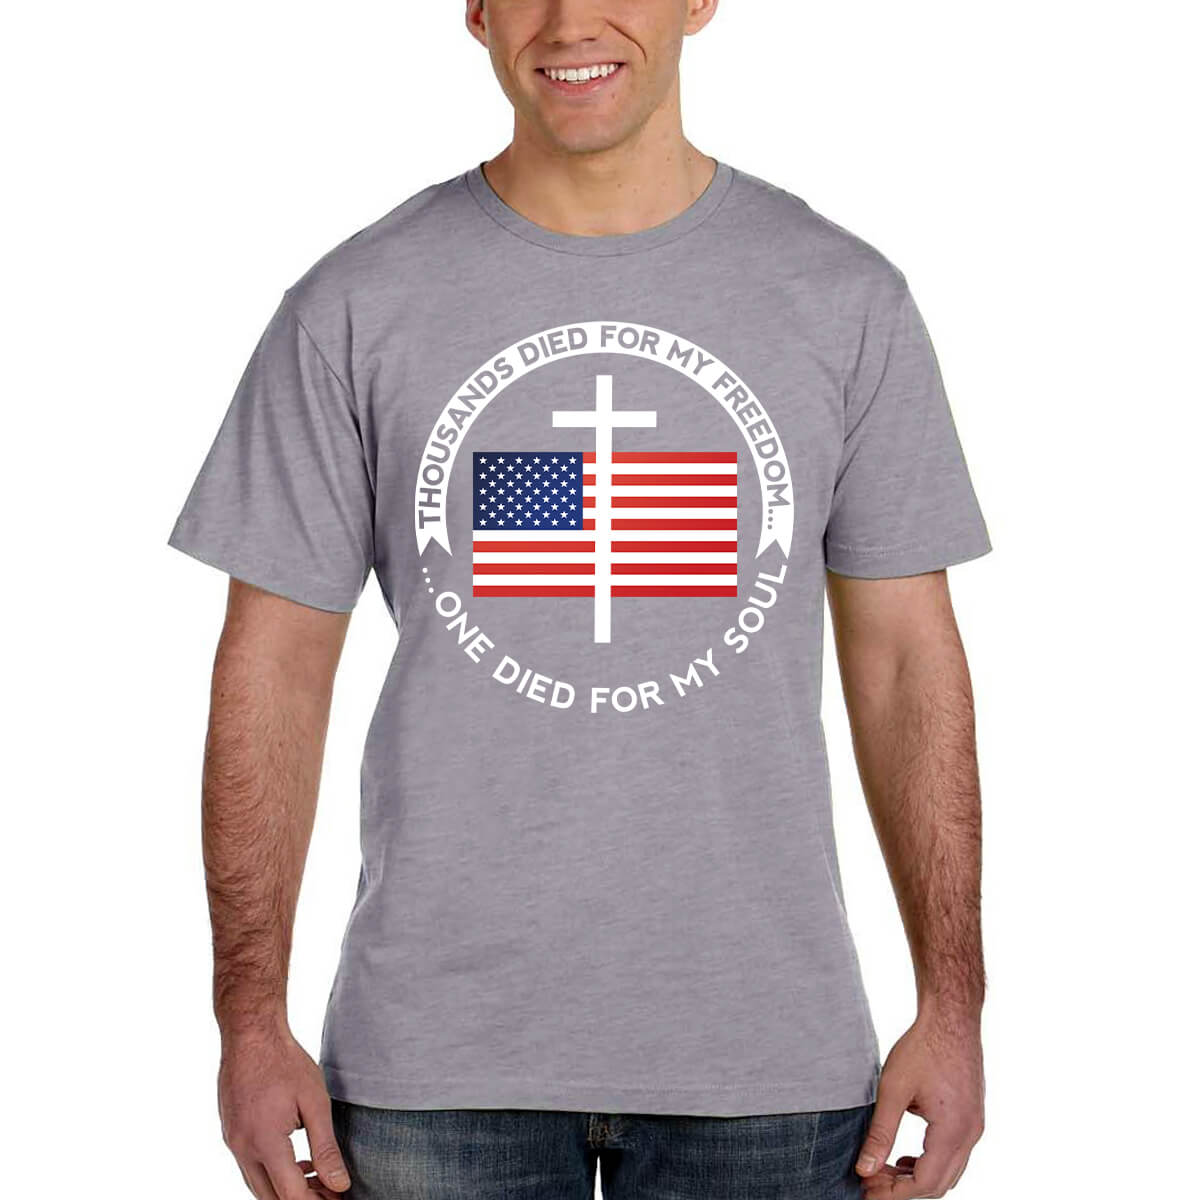 Thousands Died For My Freedom One Died For My Soul Men's T-Shirt